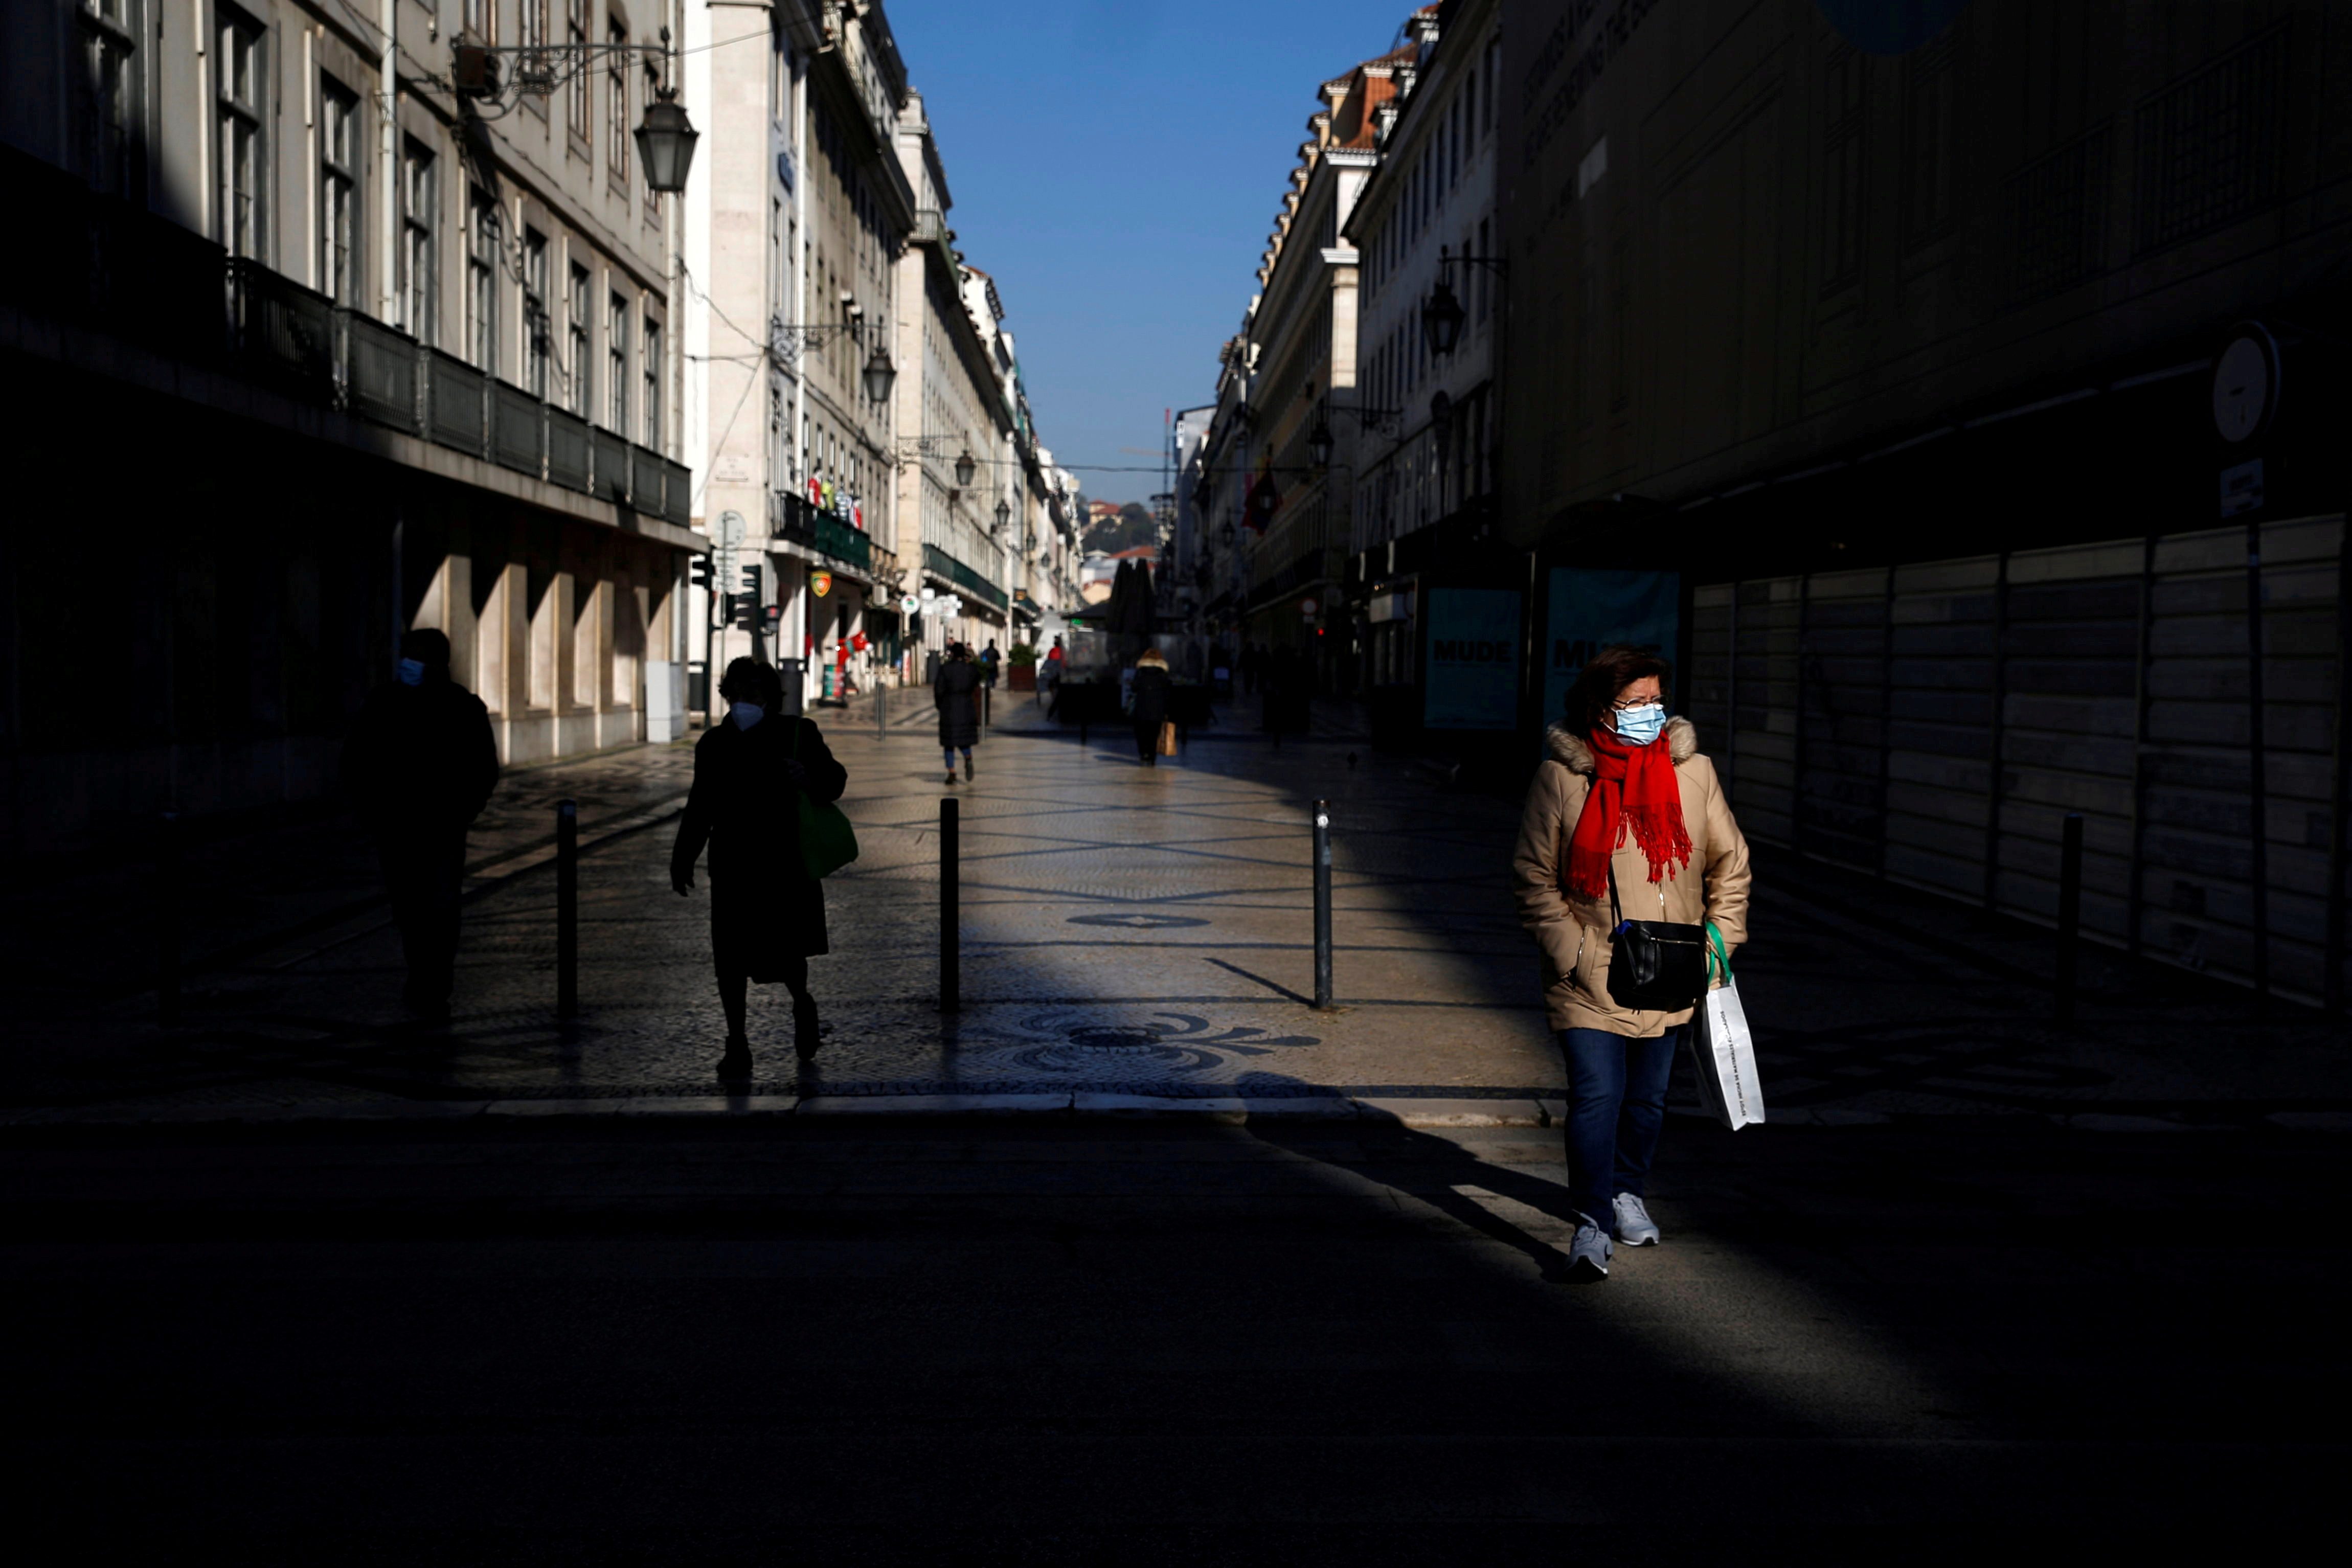 Cash-strapped Lisbon shops fear for future ahead of new COVID-19 lockdown